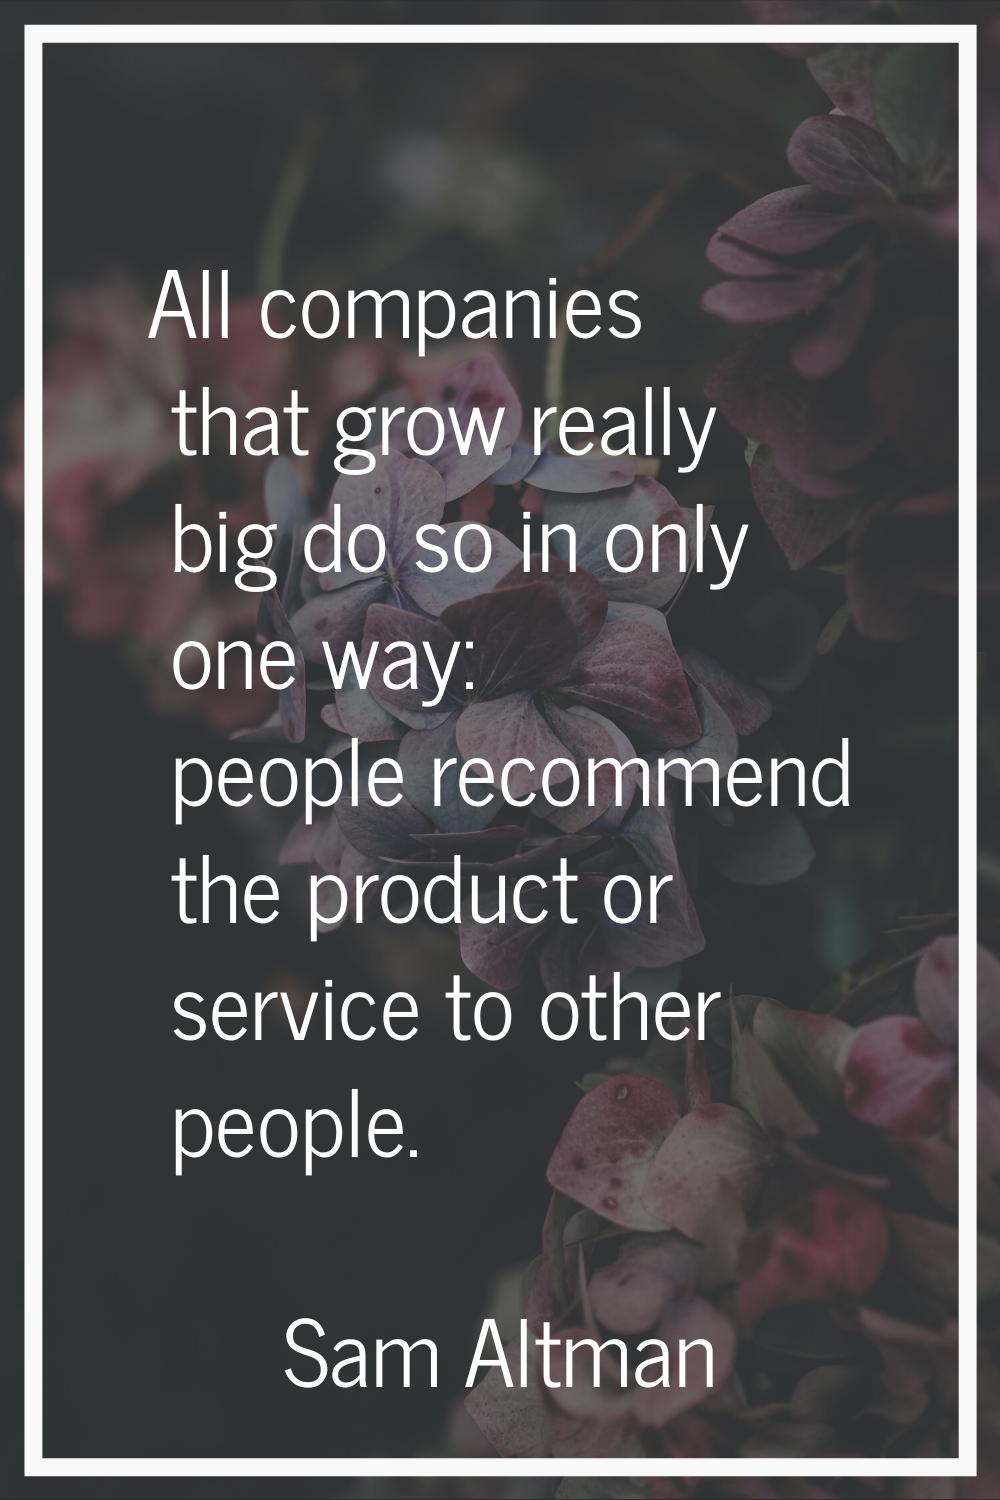 All companies that grow really big do so in only one way: people recommend the product or service t